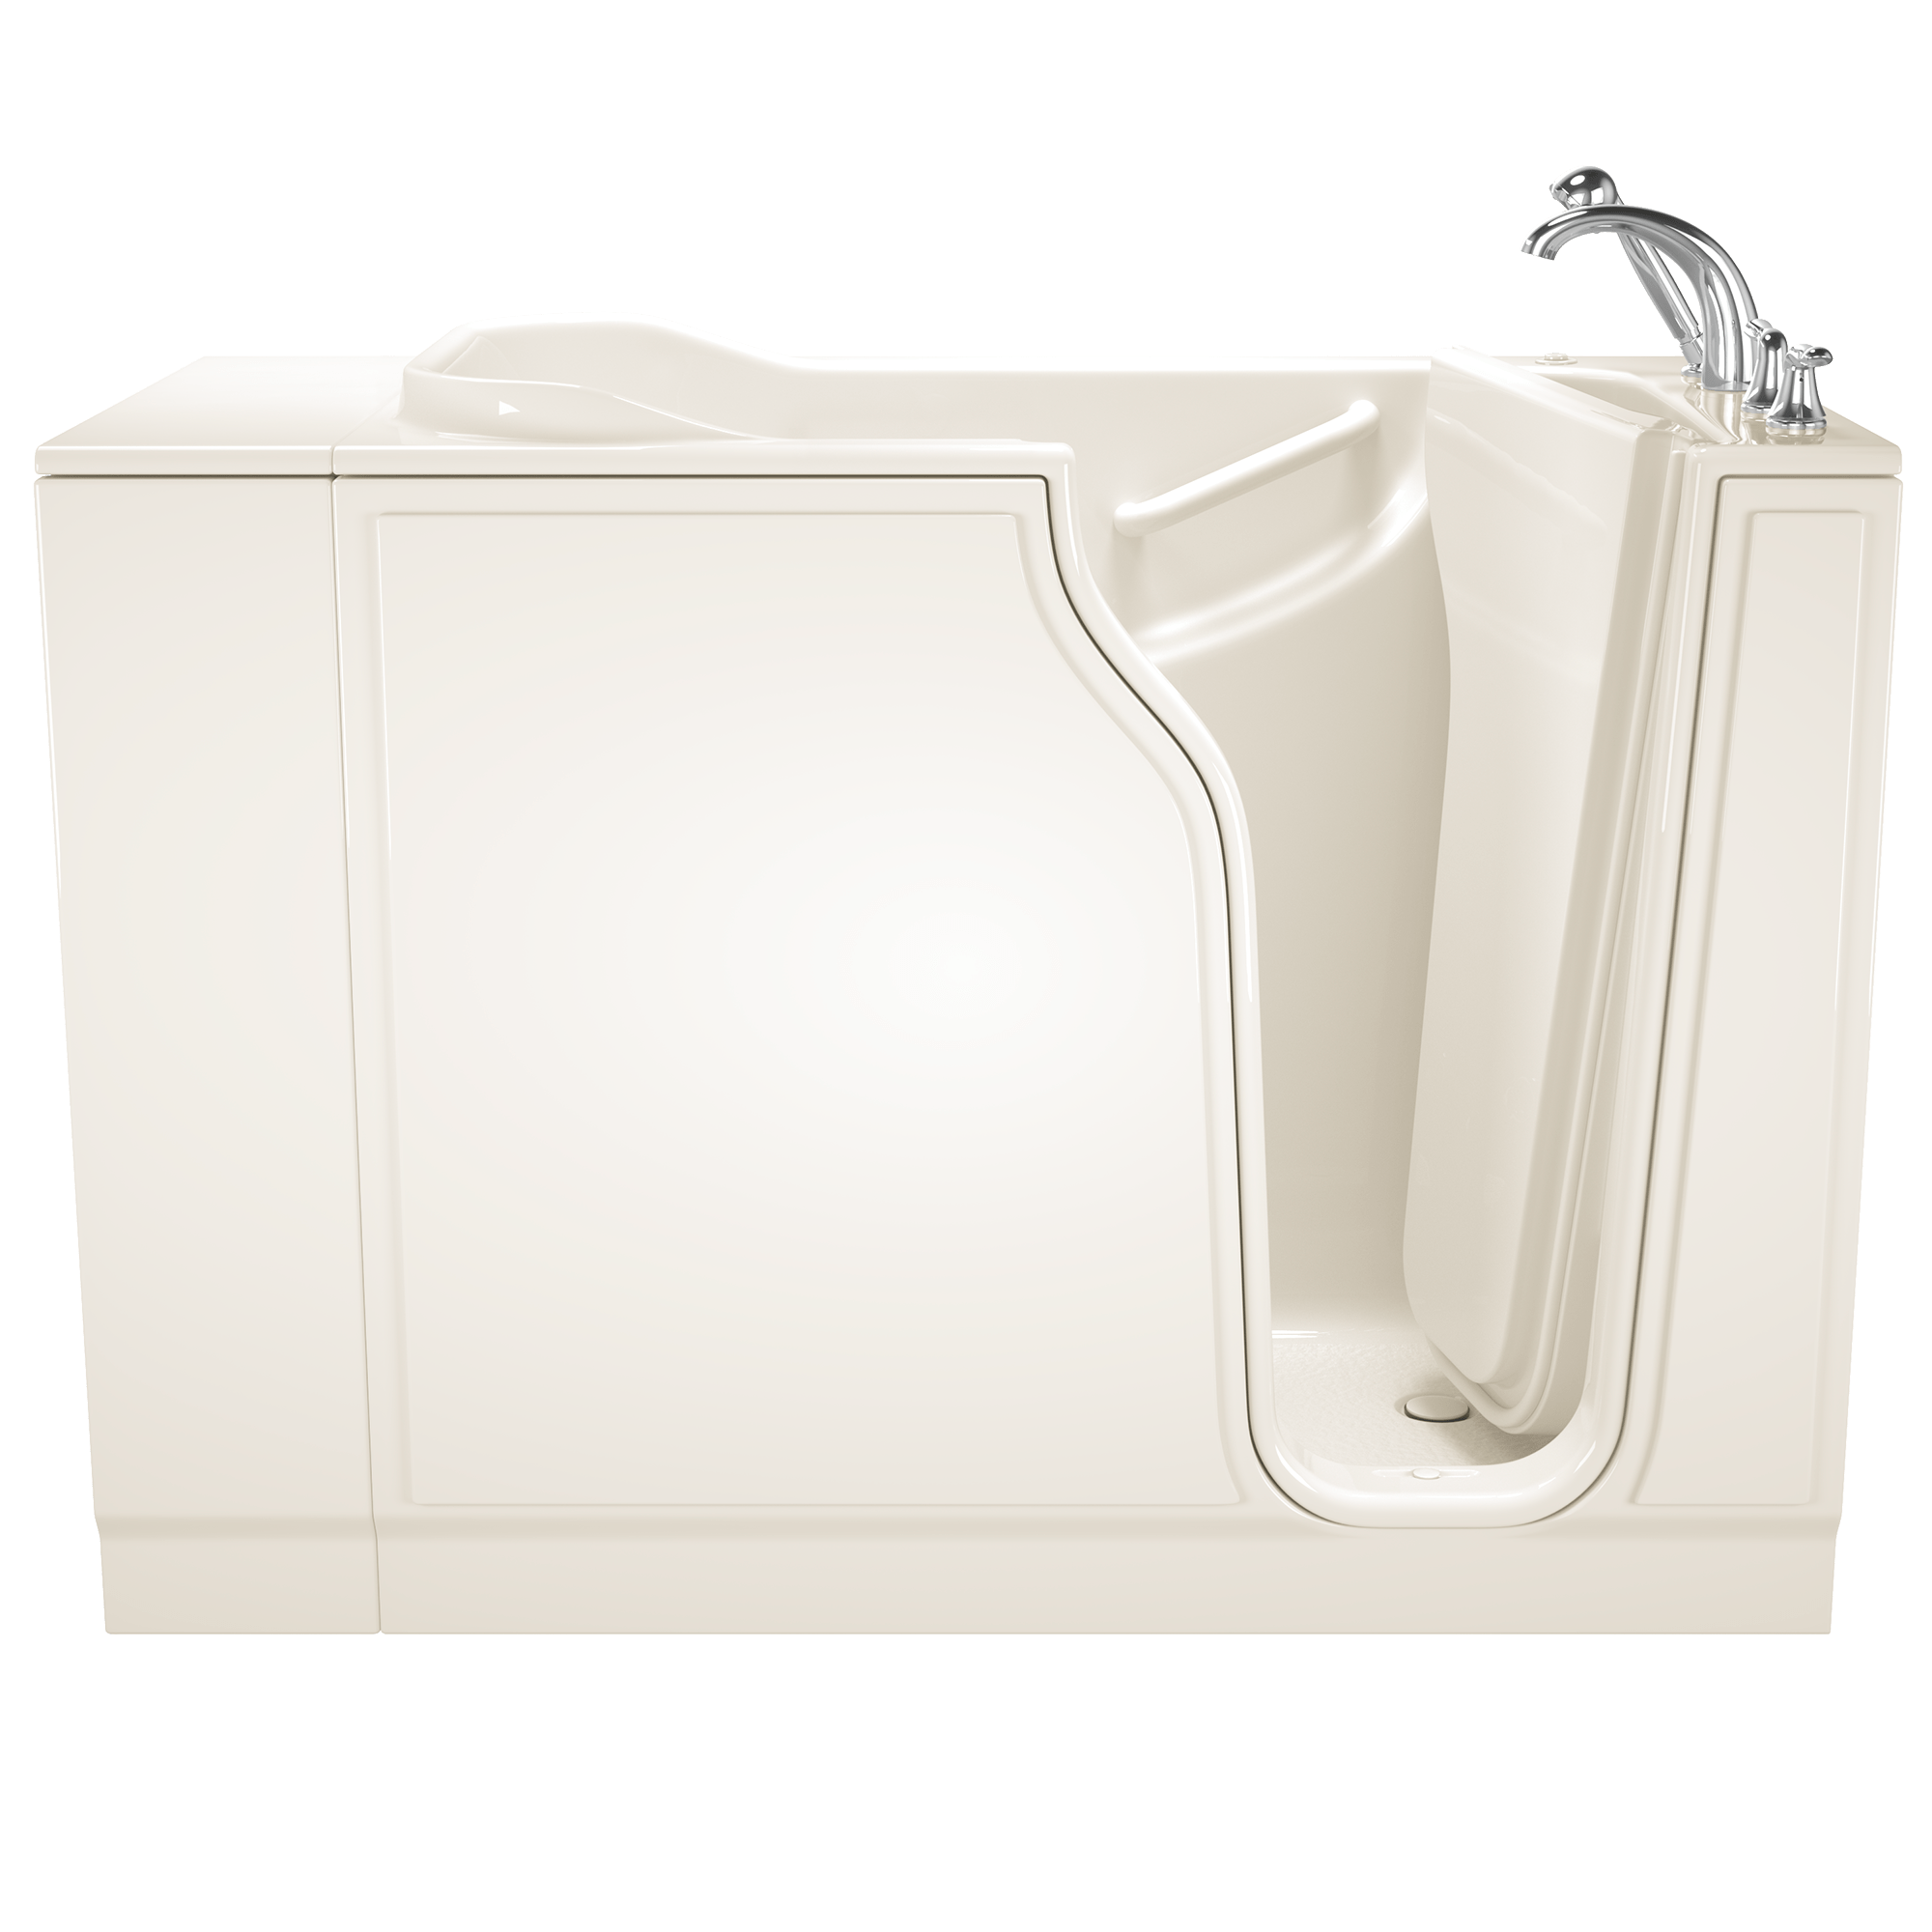 Gelcoat Entry Series 52 x 30-Inch Walk-In Tub With Air Spa System – Right-Hand Drain With Faucet